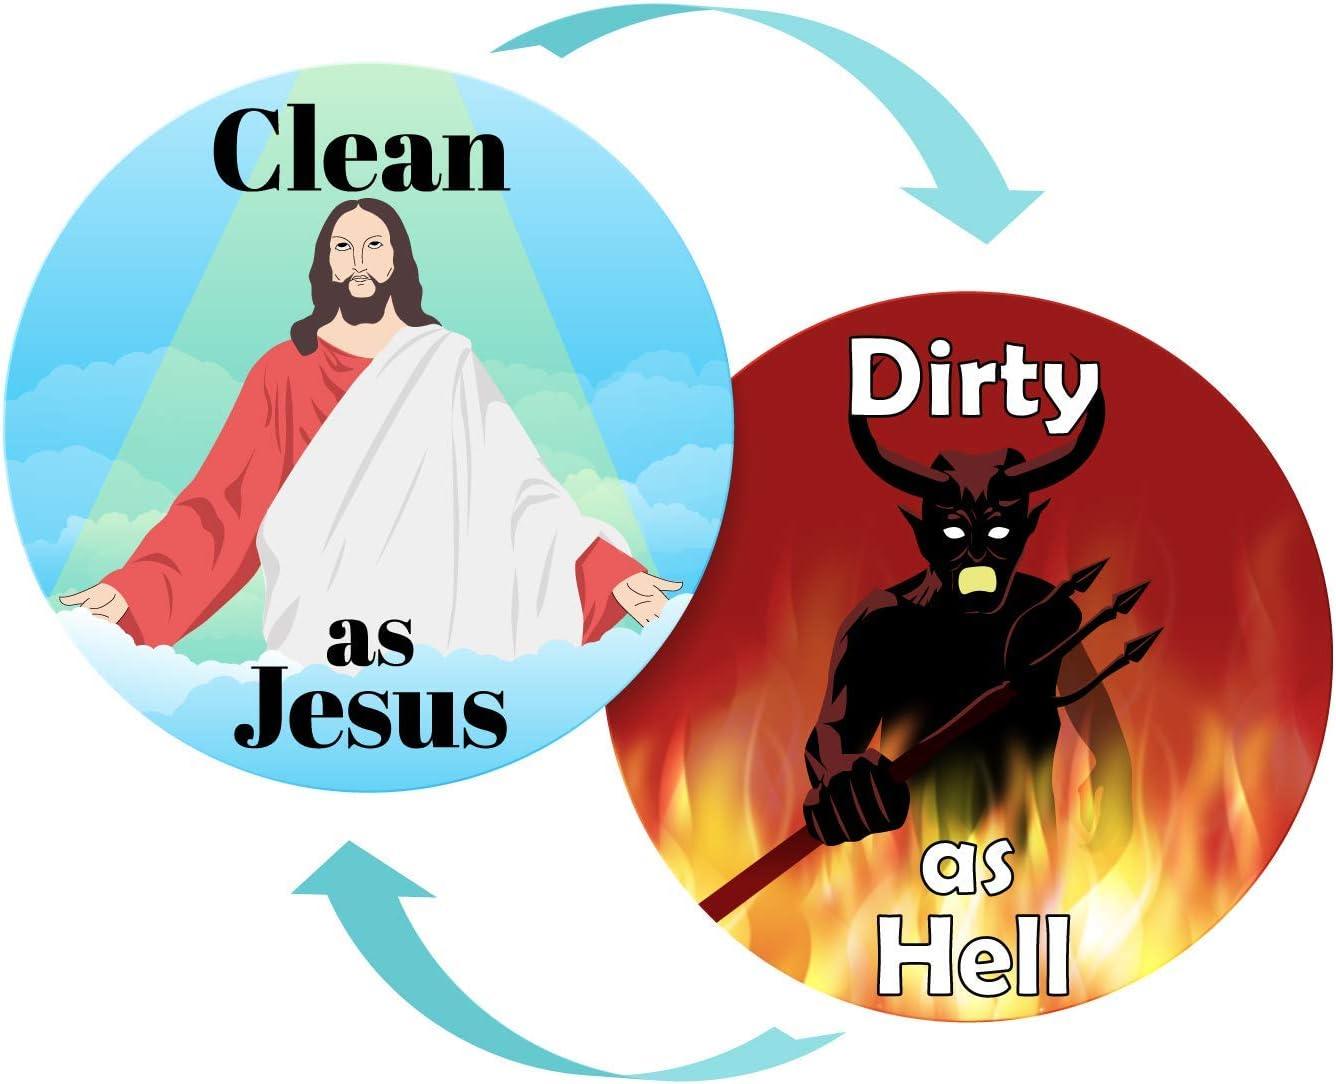 Jesus / Devil Double Sided Magnet - Clean Dirty Indicator for Dishwasher - Anjelstore 